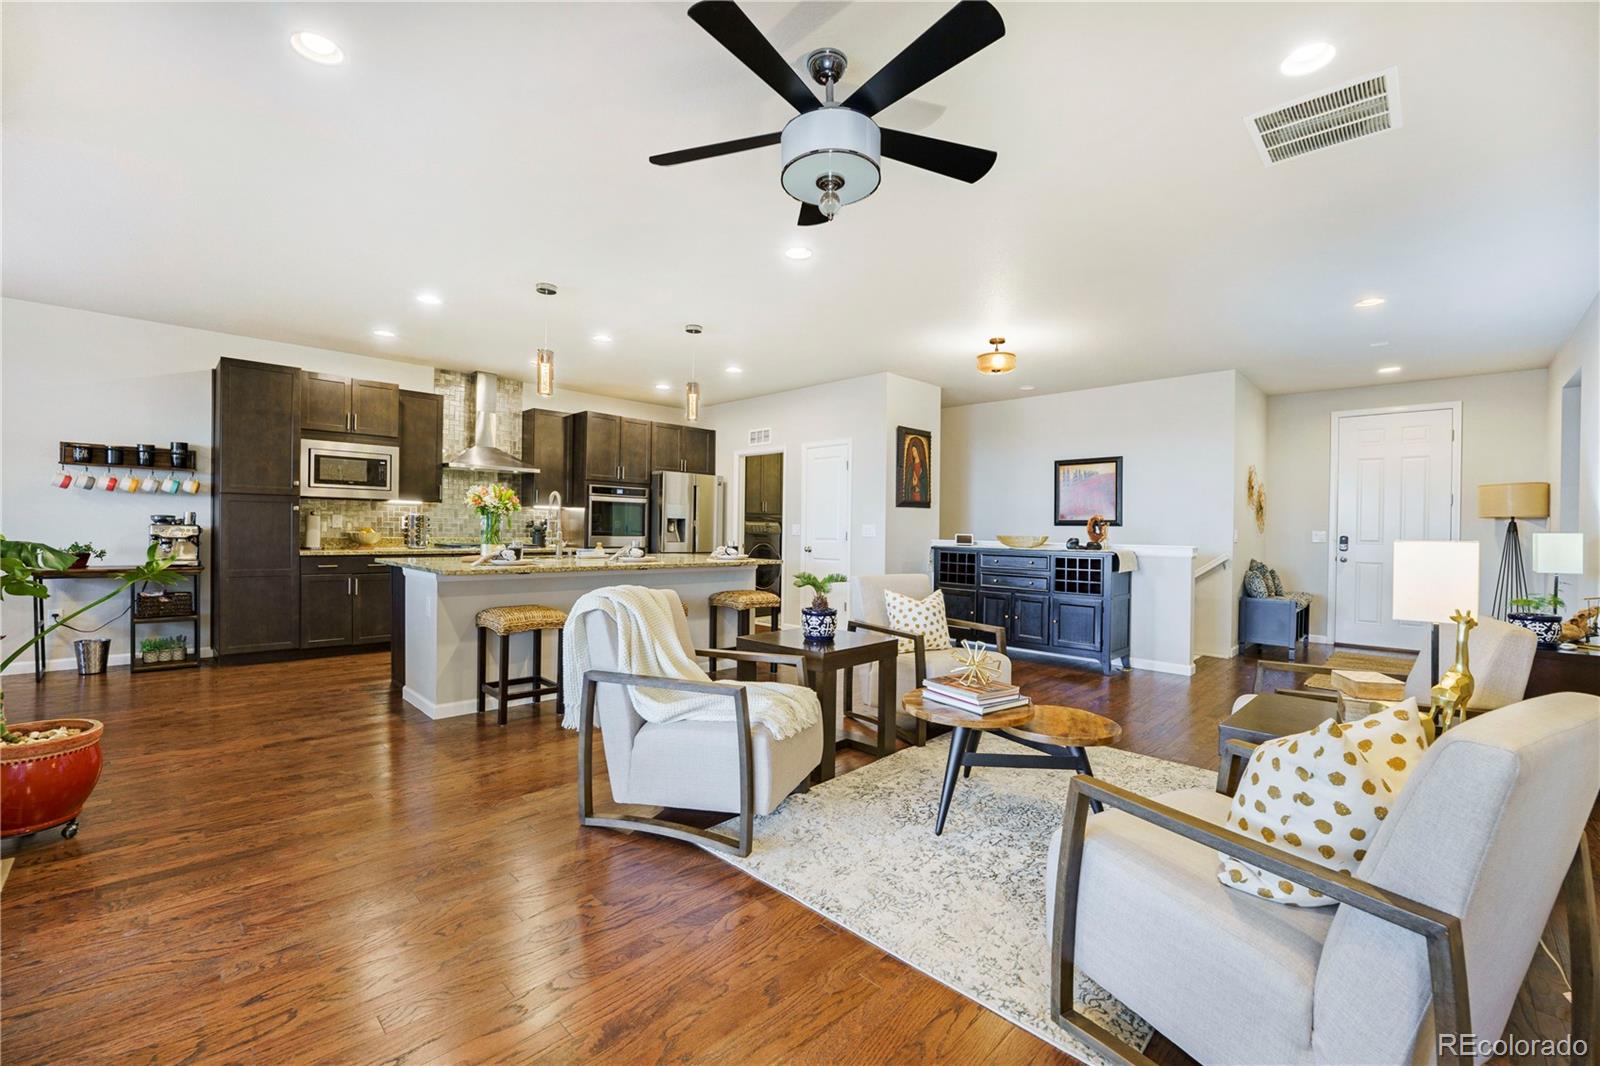 a living room with stainless steel appliances kitchen island granite countertop furniture and a dining table